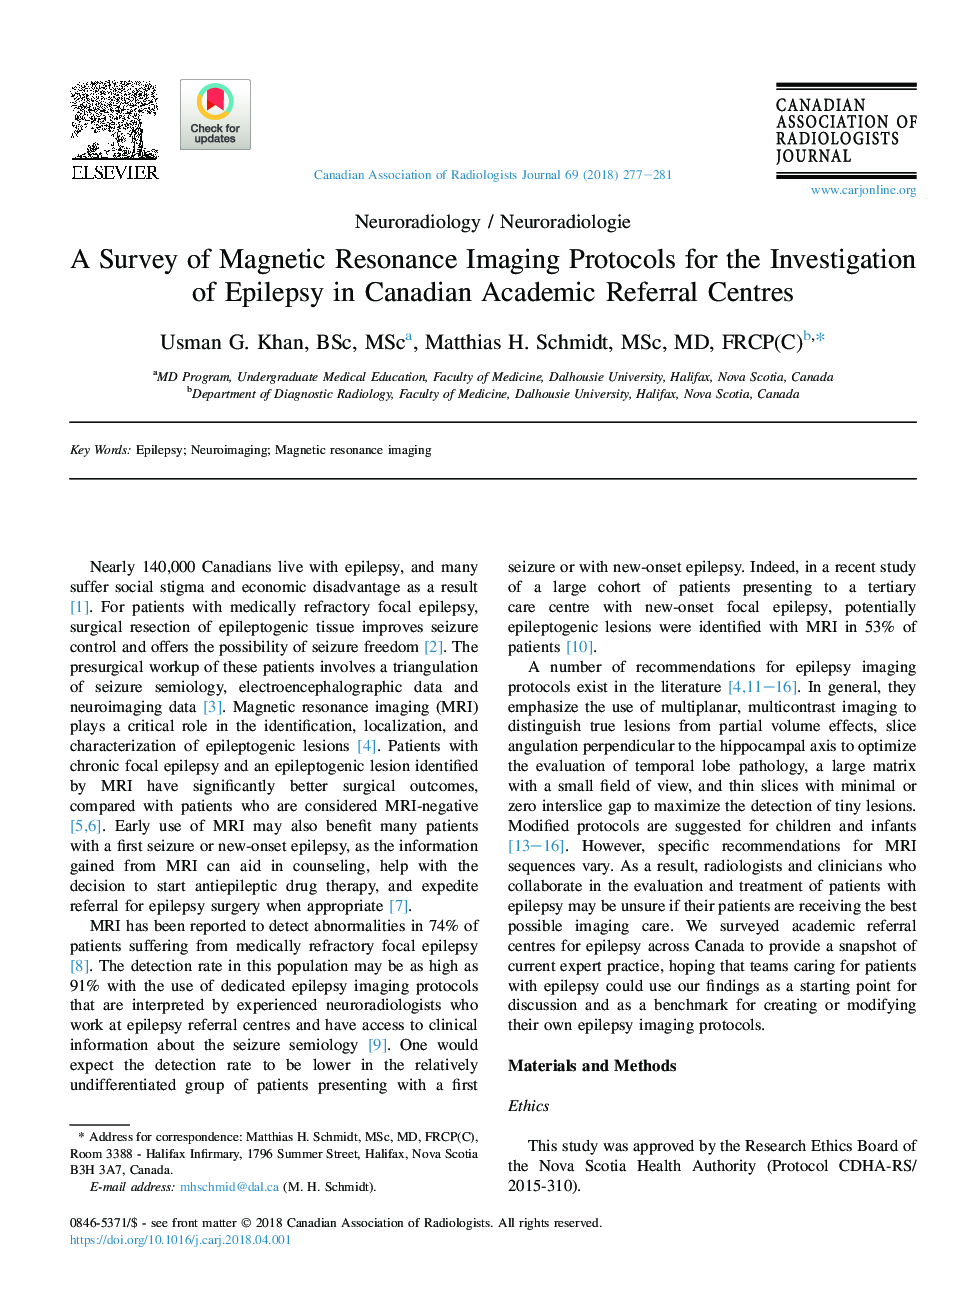 A Survey of Magnetic Resonance Imaging Protocols for the Investigation of Epilepsy in Canadian Academic Referral Centres